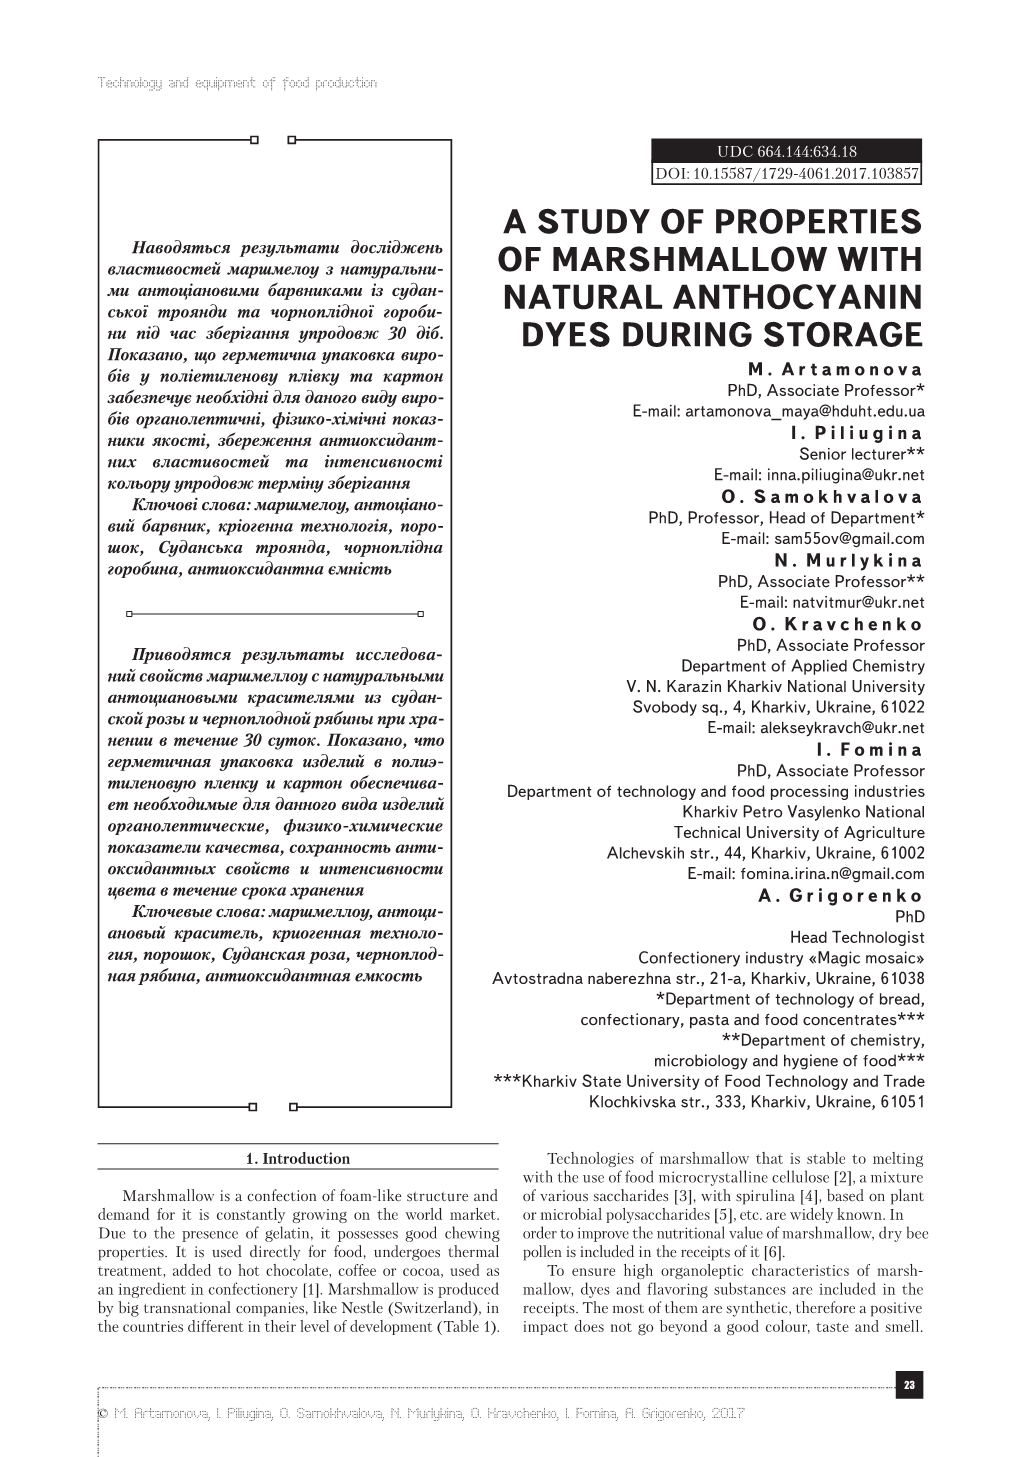 A Study of Properties of Marshmallow with Natural Anthocyanin Dyes During Storage